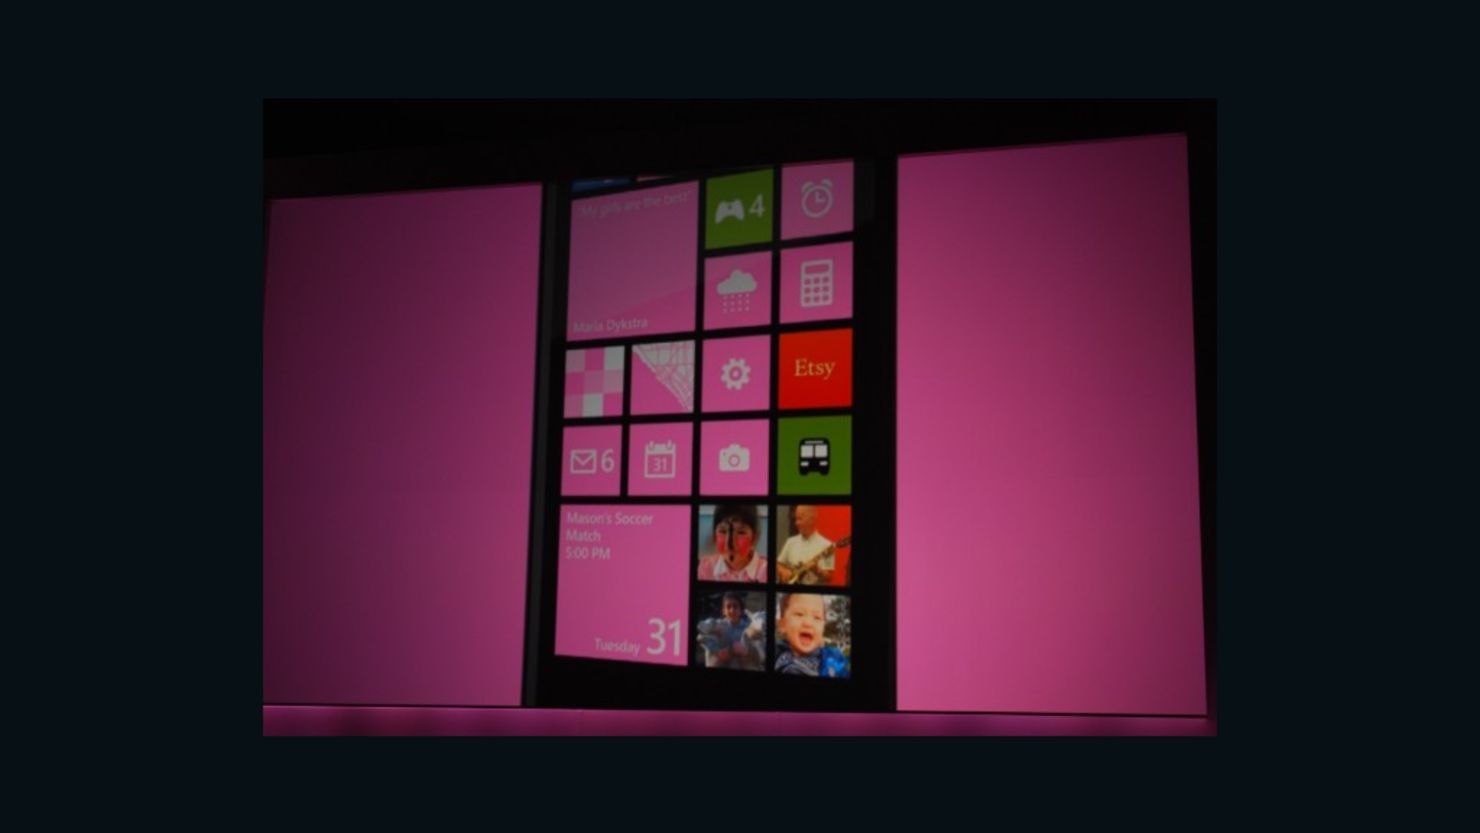 Windows Phone 8's Live Tiles are its "heart and soul," program manager Joe Belfiore said.